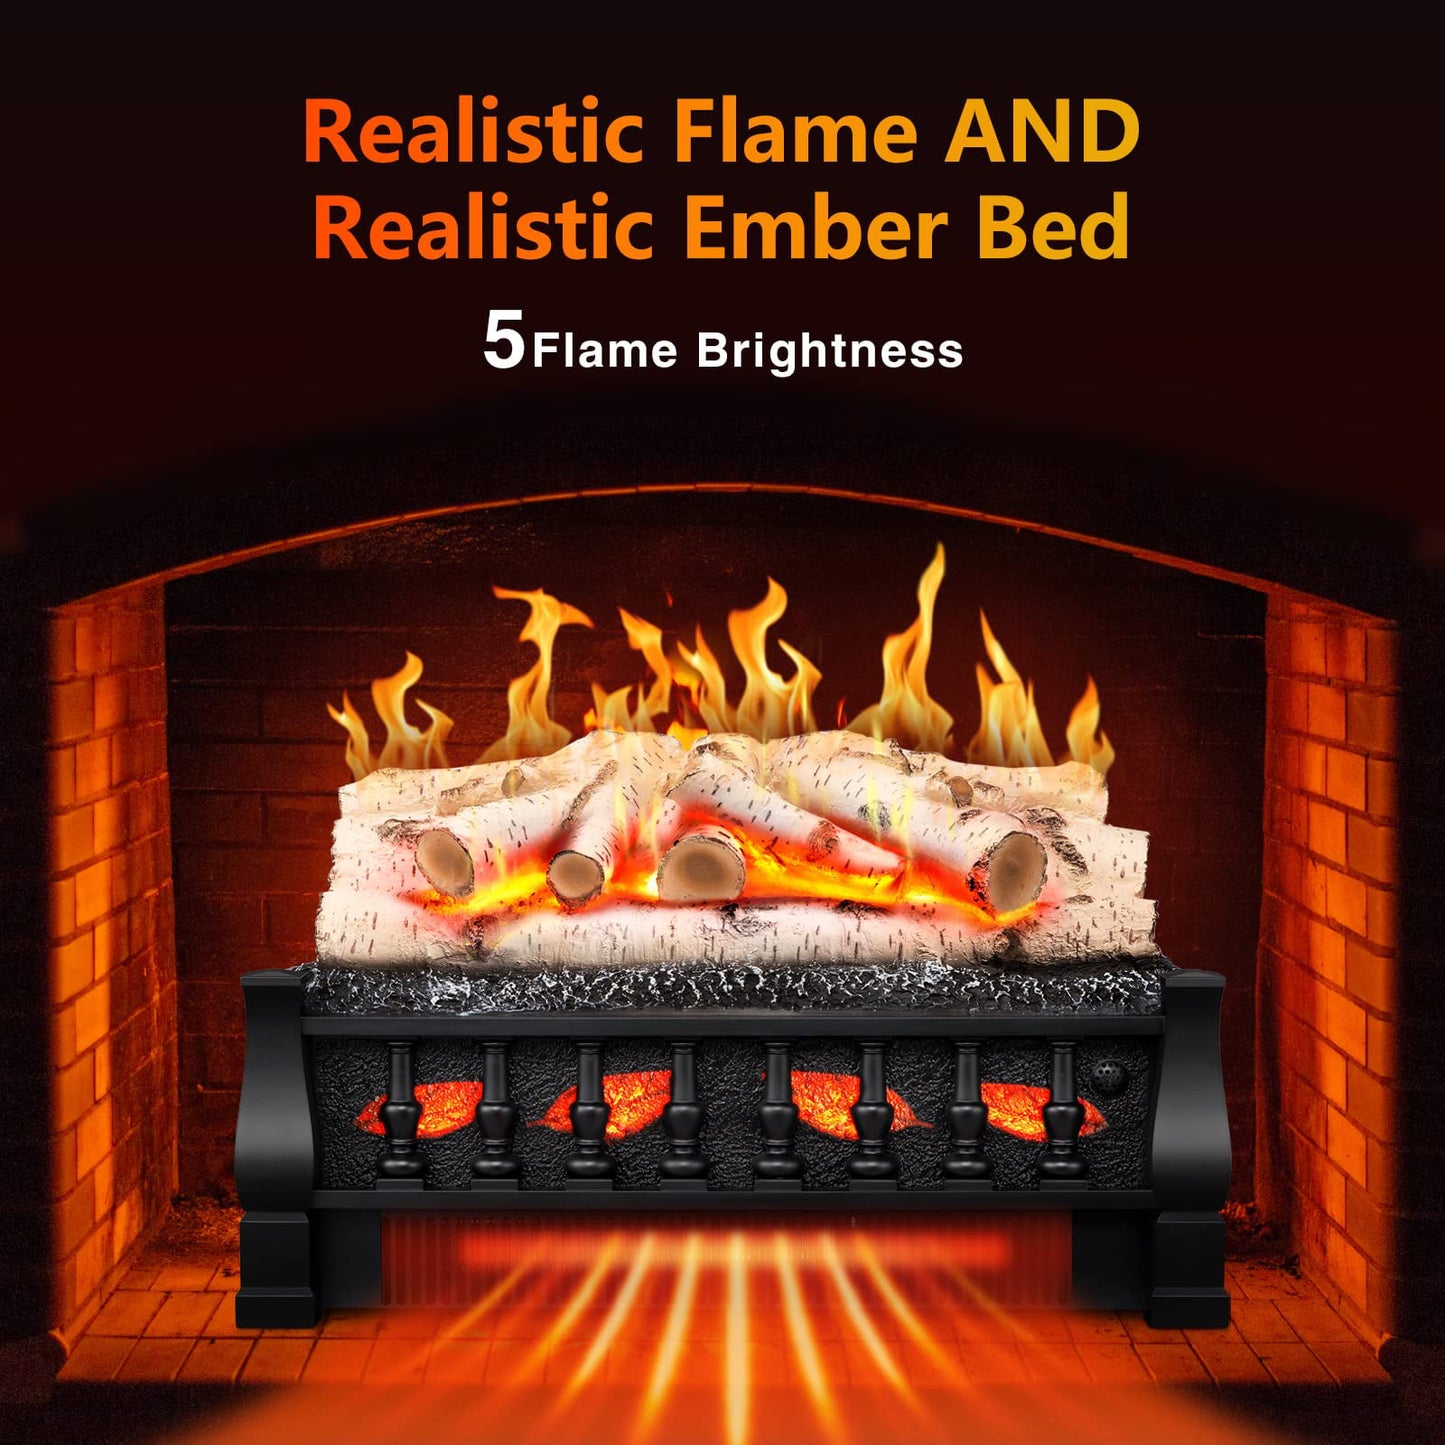 KISSAIR Electric Fireplace Log Set Heater 21IN, Remote Control, Flame Brightness Adjustable,1500W Whitish Gray logs